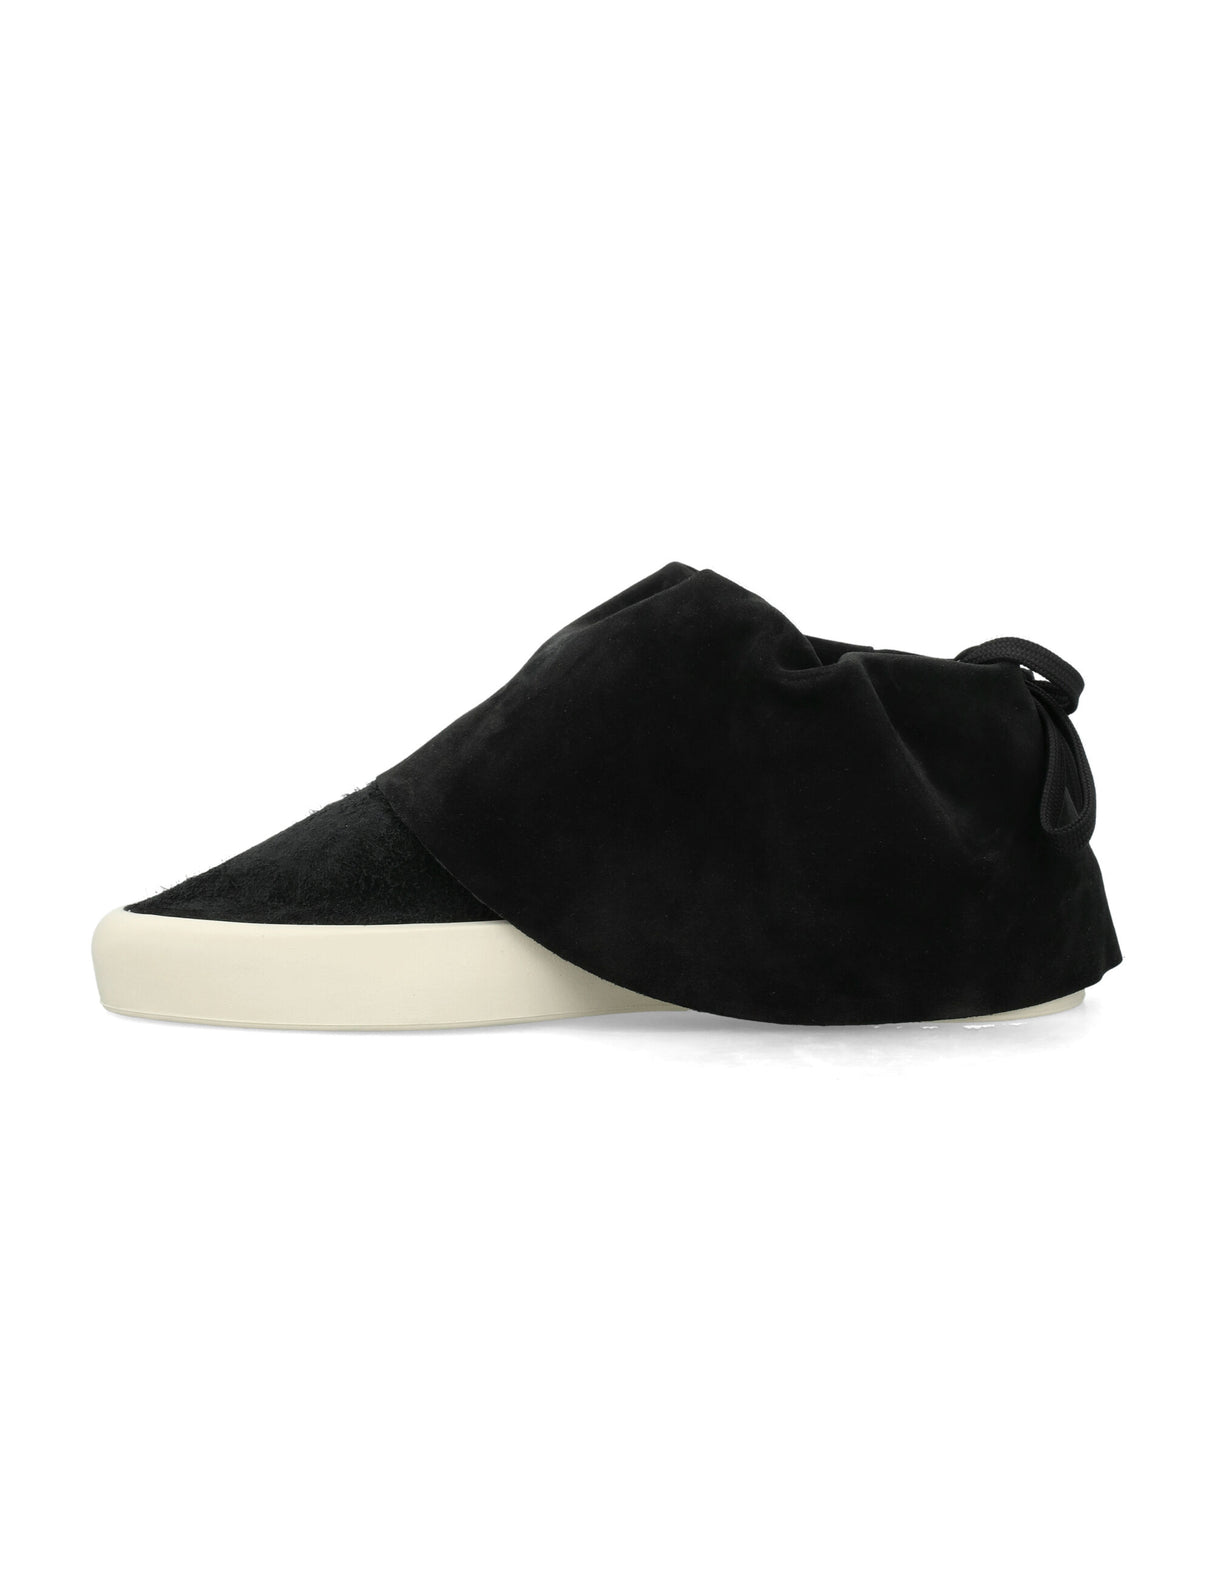 FEAR OF GOD Black Suede Leather Moc Low Sneakers for Men